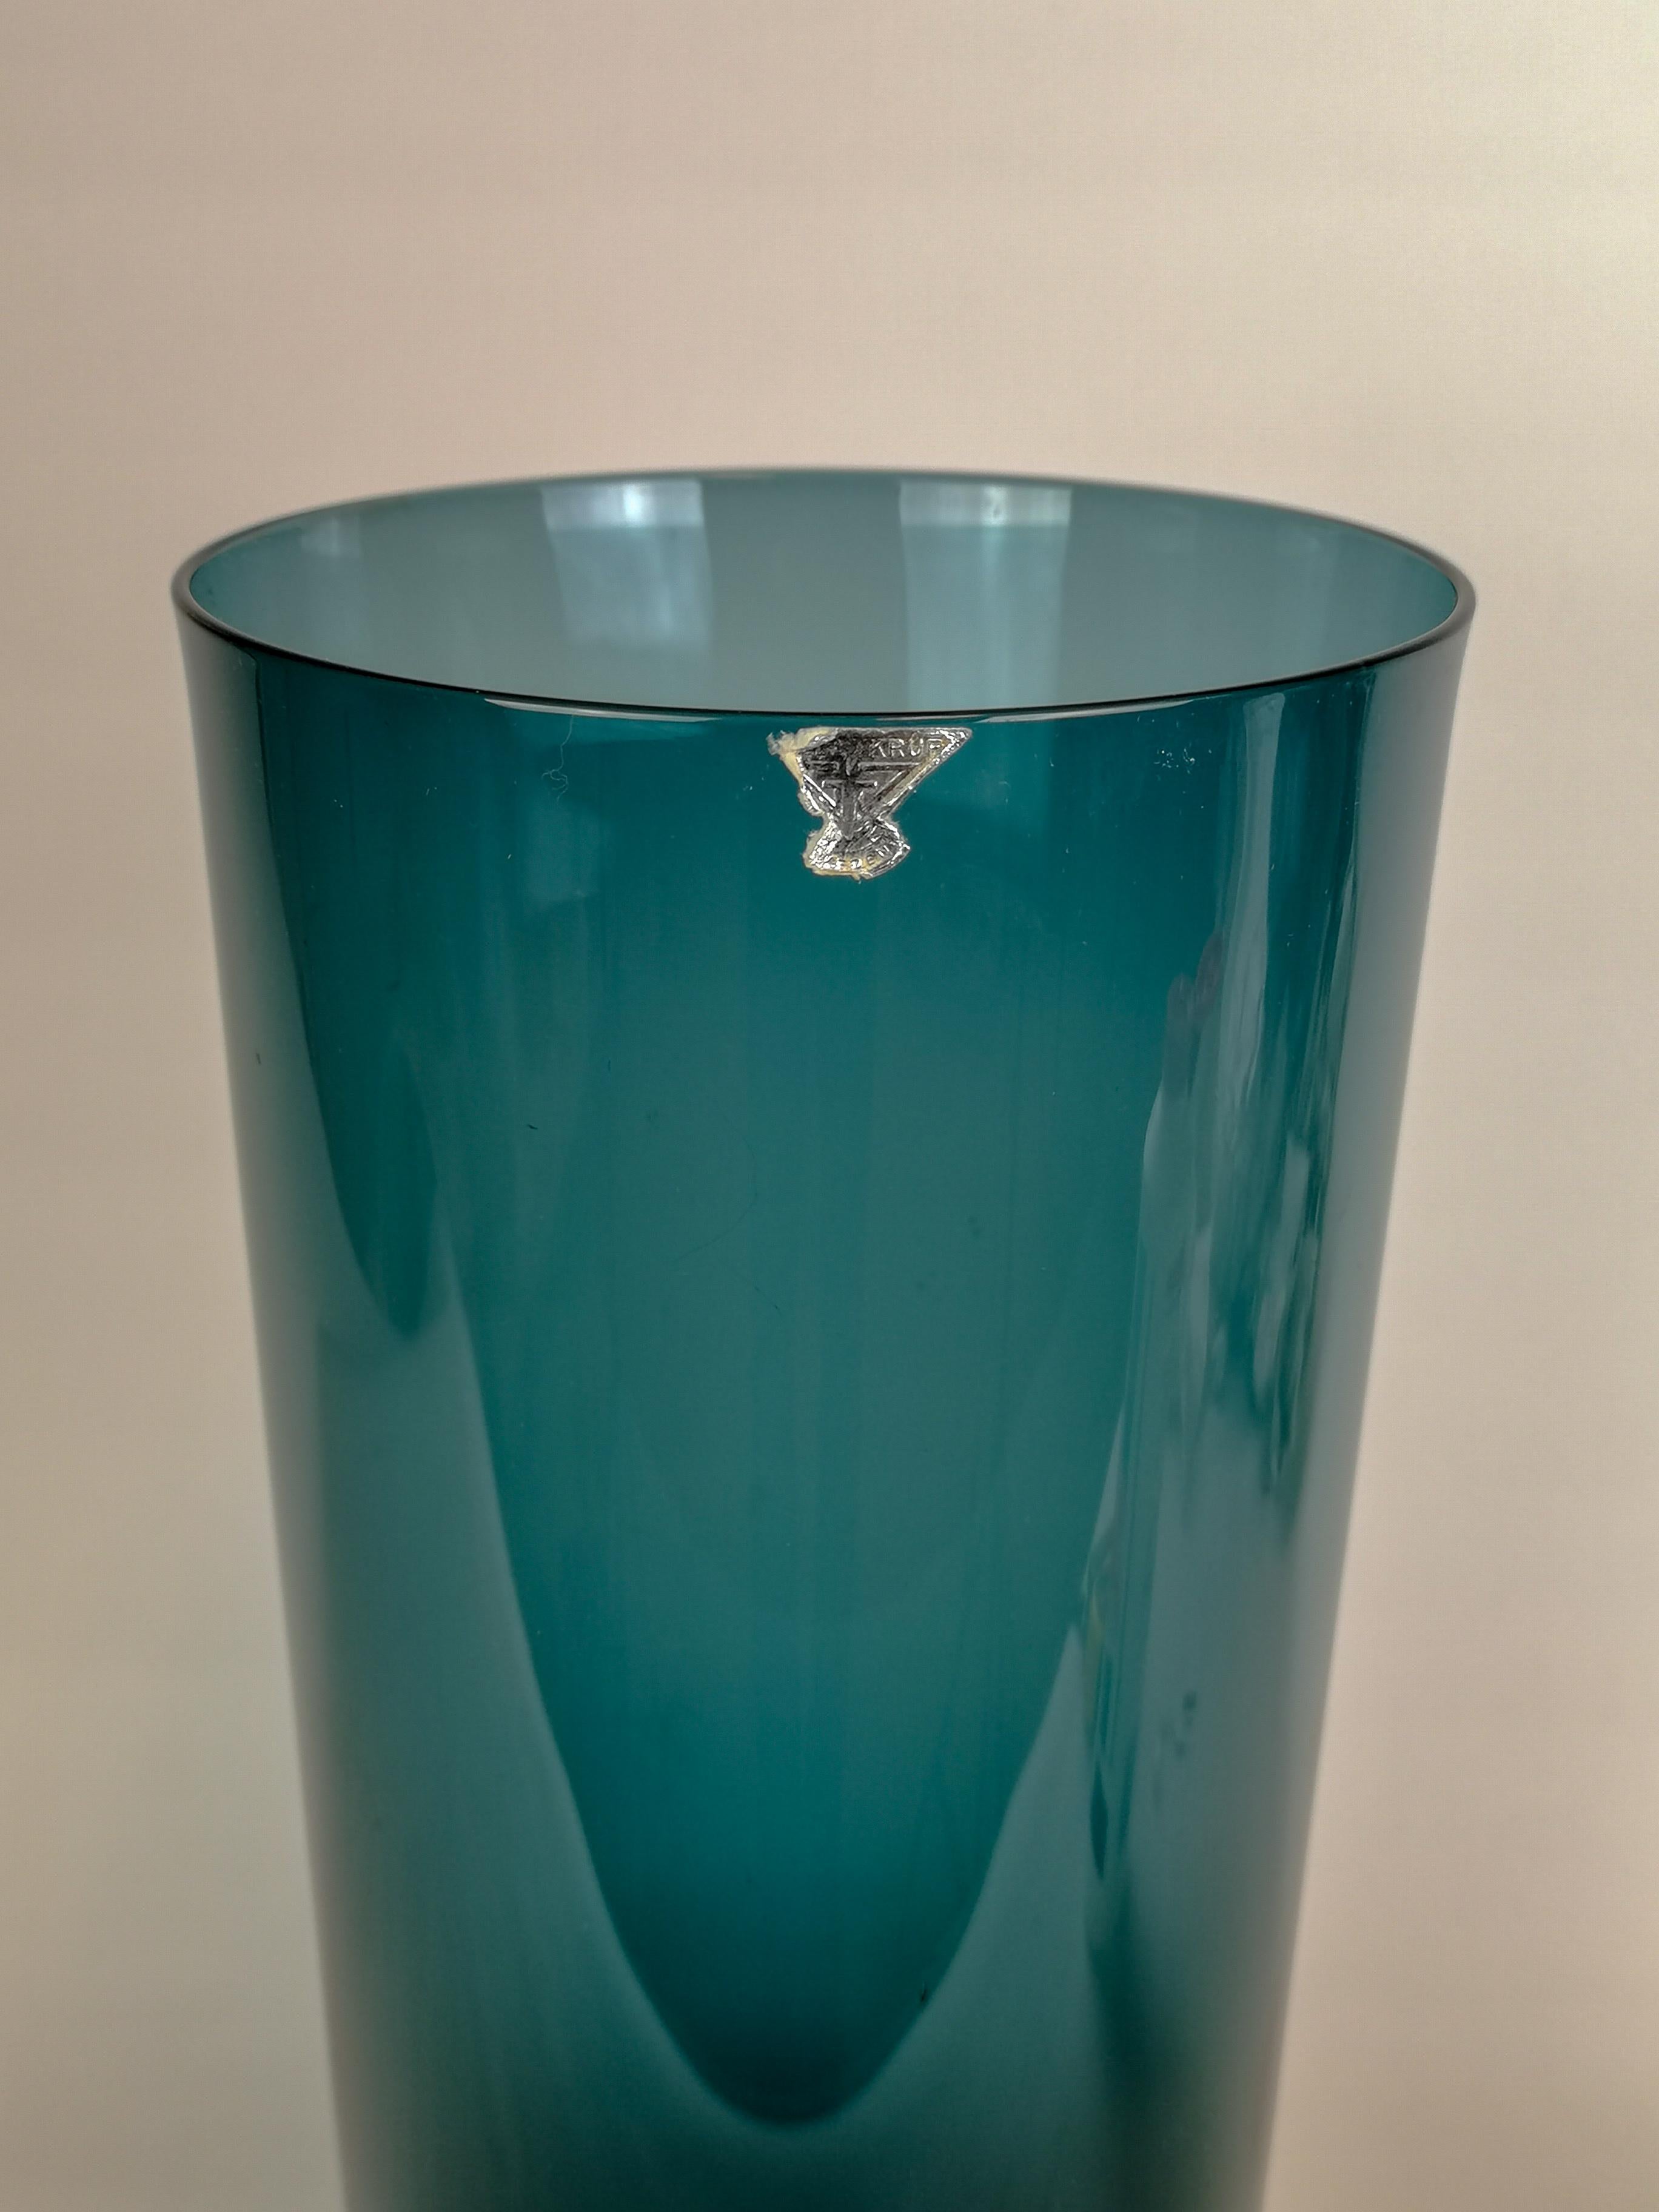 This wonderful large vase made in Sweden at GullaSkruf was designed by Kjell Blomberg in the 1950s.
It has a lovely color and as many of the designers from Sweden the light has a central part to give the glass piece that little bit of extra. This